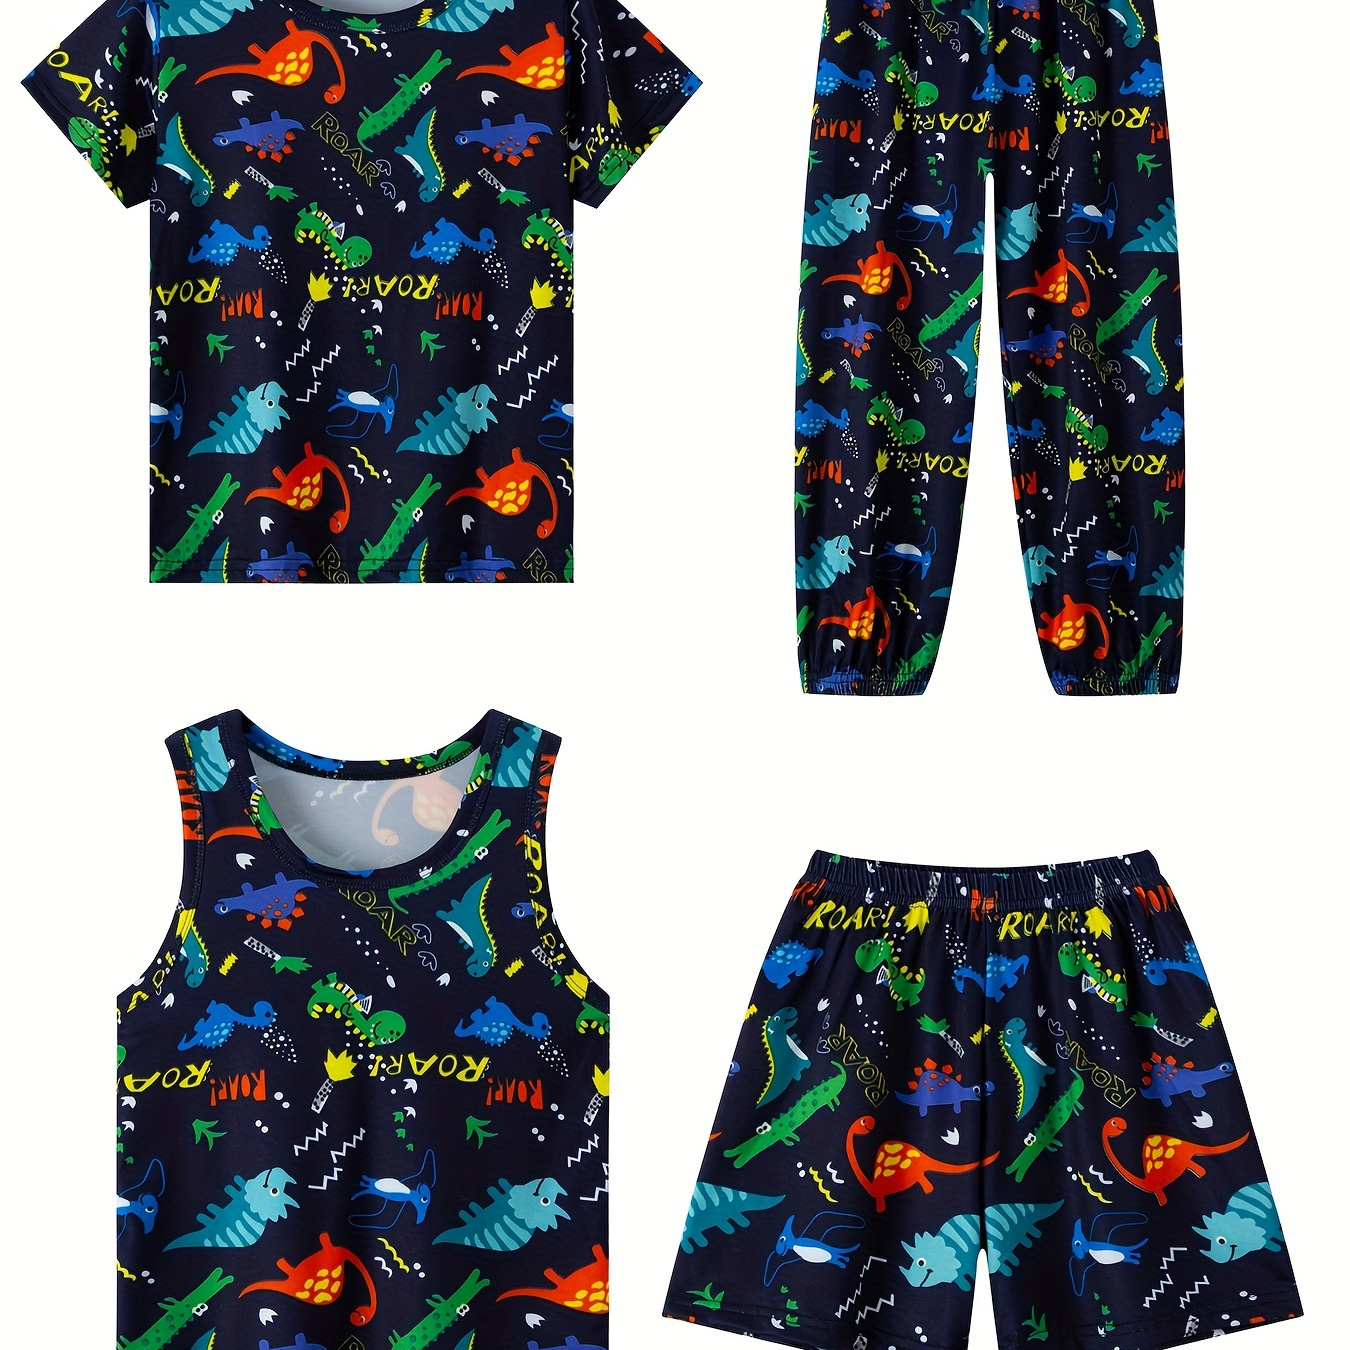 

4 Pcs Boy's Funny Science Dinosaur Pattern Short Sleeves + Shorts + Vest + Trousers Multi-pack Pajama Set, Comfortable & Skin-friendly Style Pajamas For Boy's Cozy Loungewear